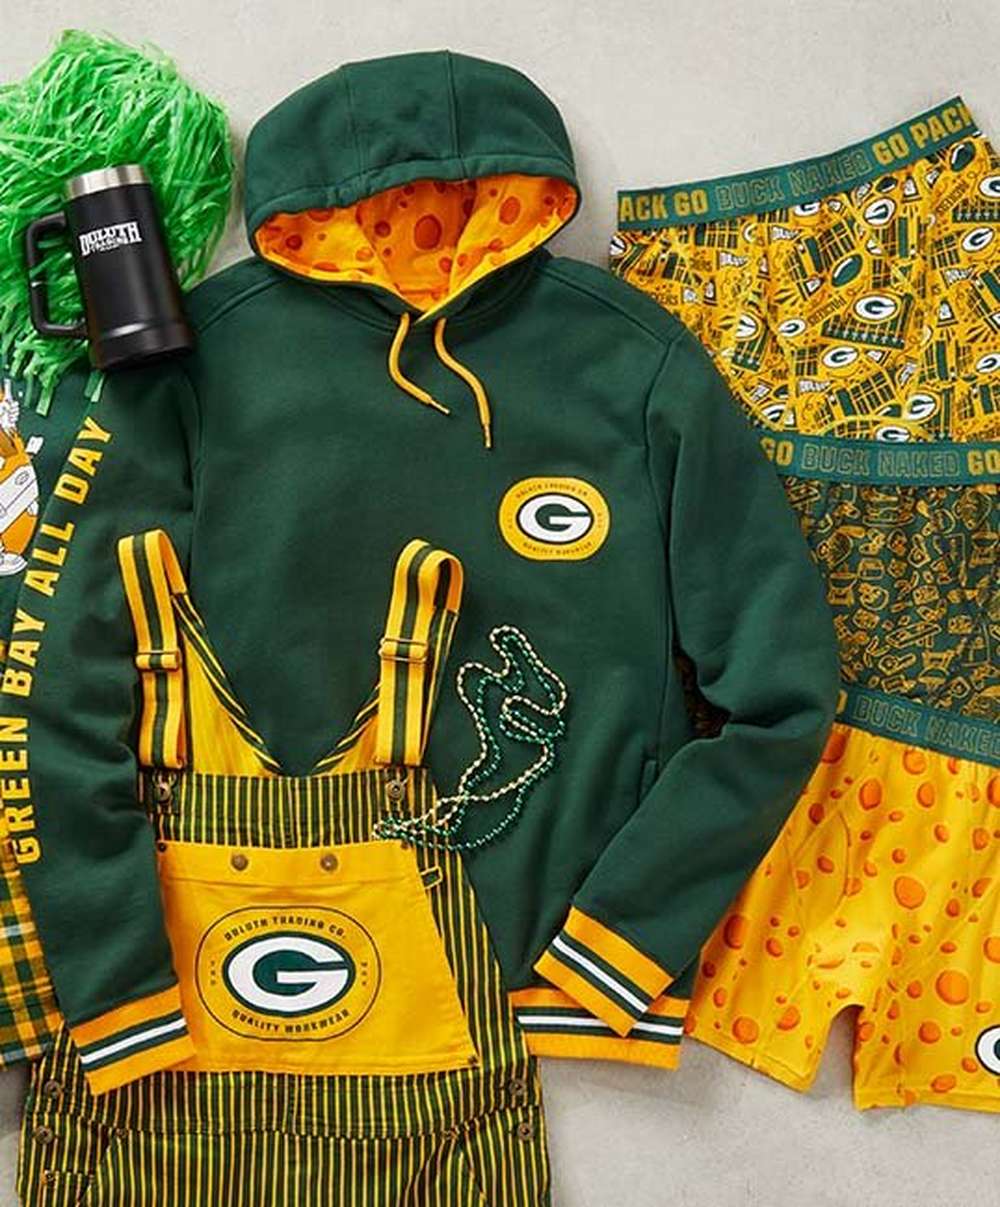 Assortment of men's Packers branded clothing